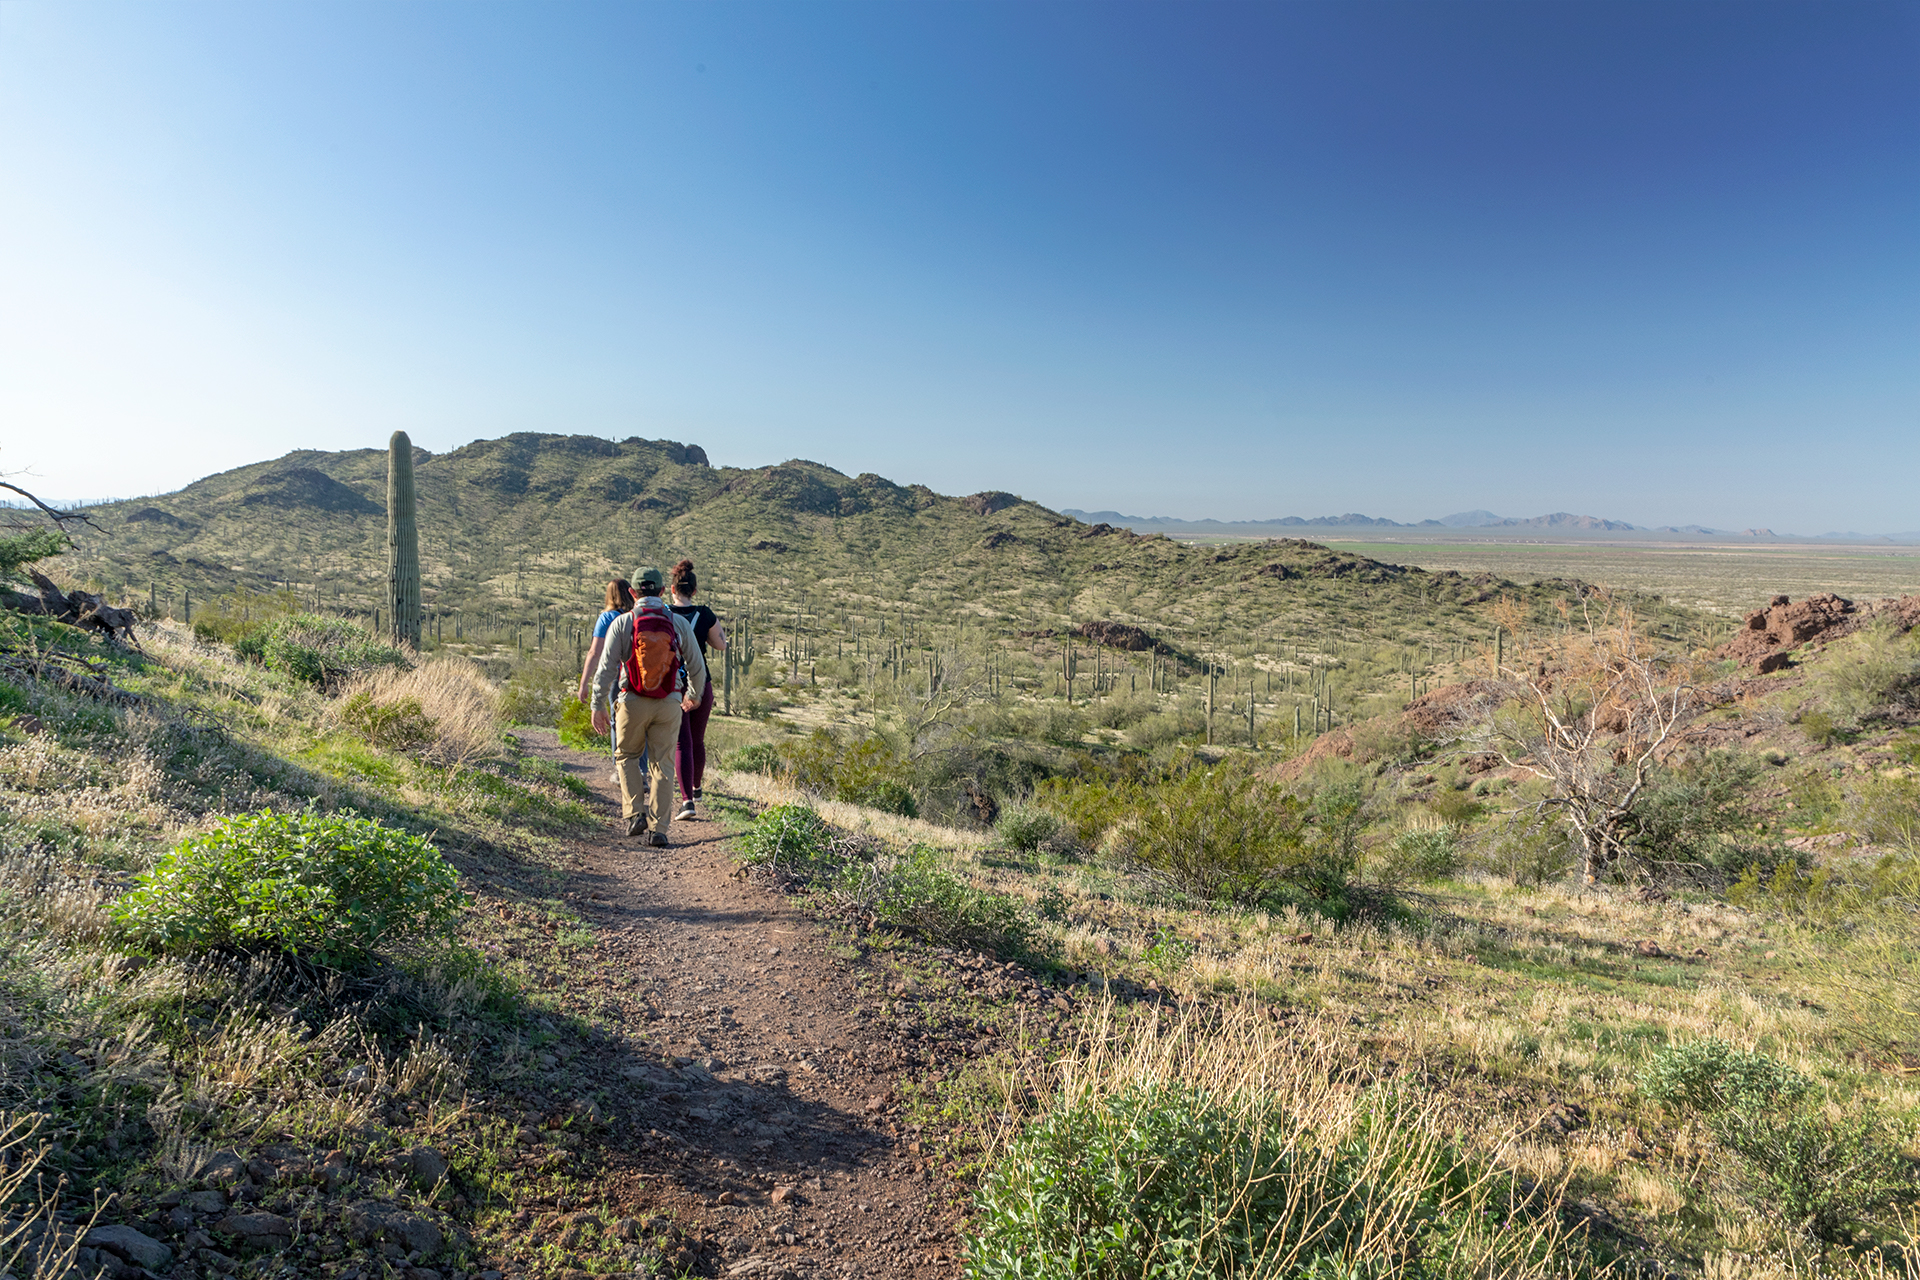 Find a hiking trail for every skill level, from easy walks to tough climbs!